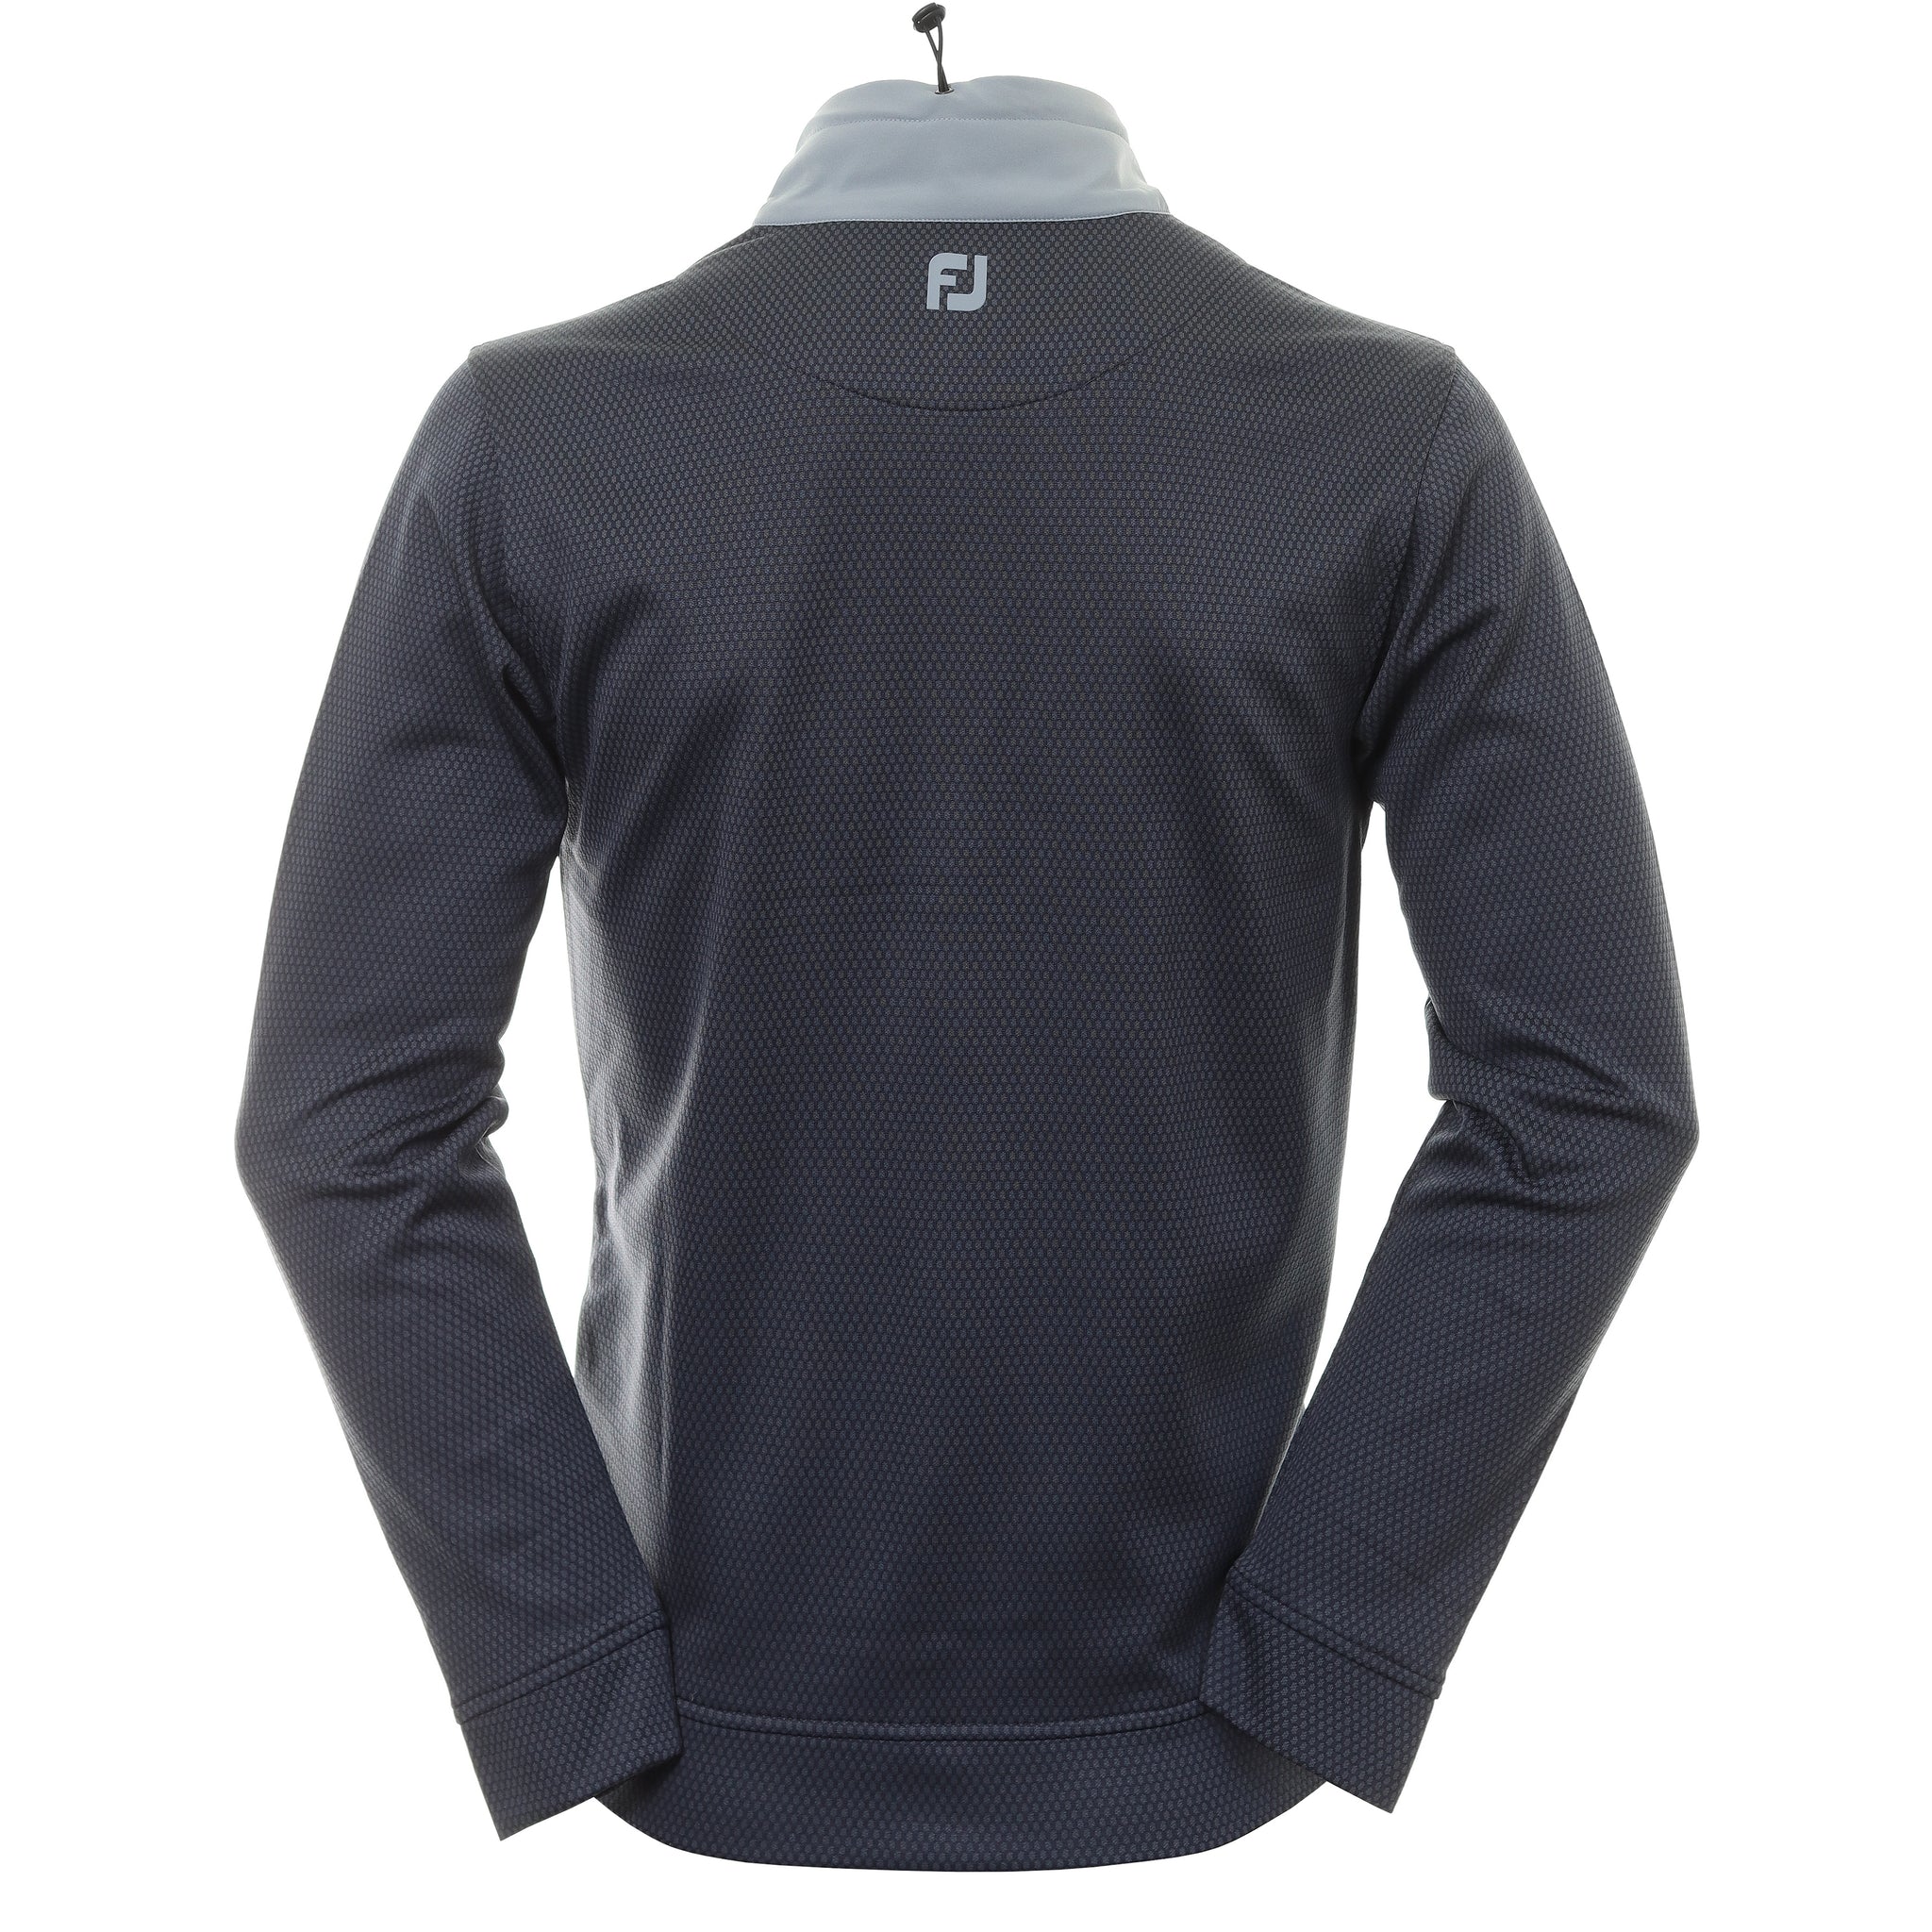 FootJoy ThermoSeries Hybrid Jacket 88808 Charcoal Grey | Function18 ...